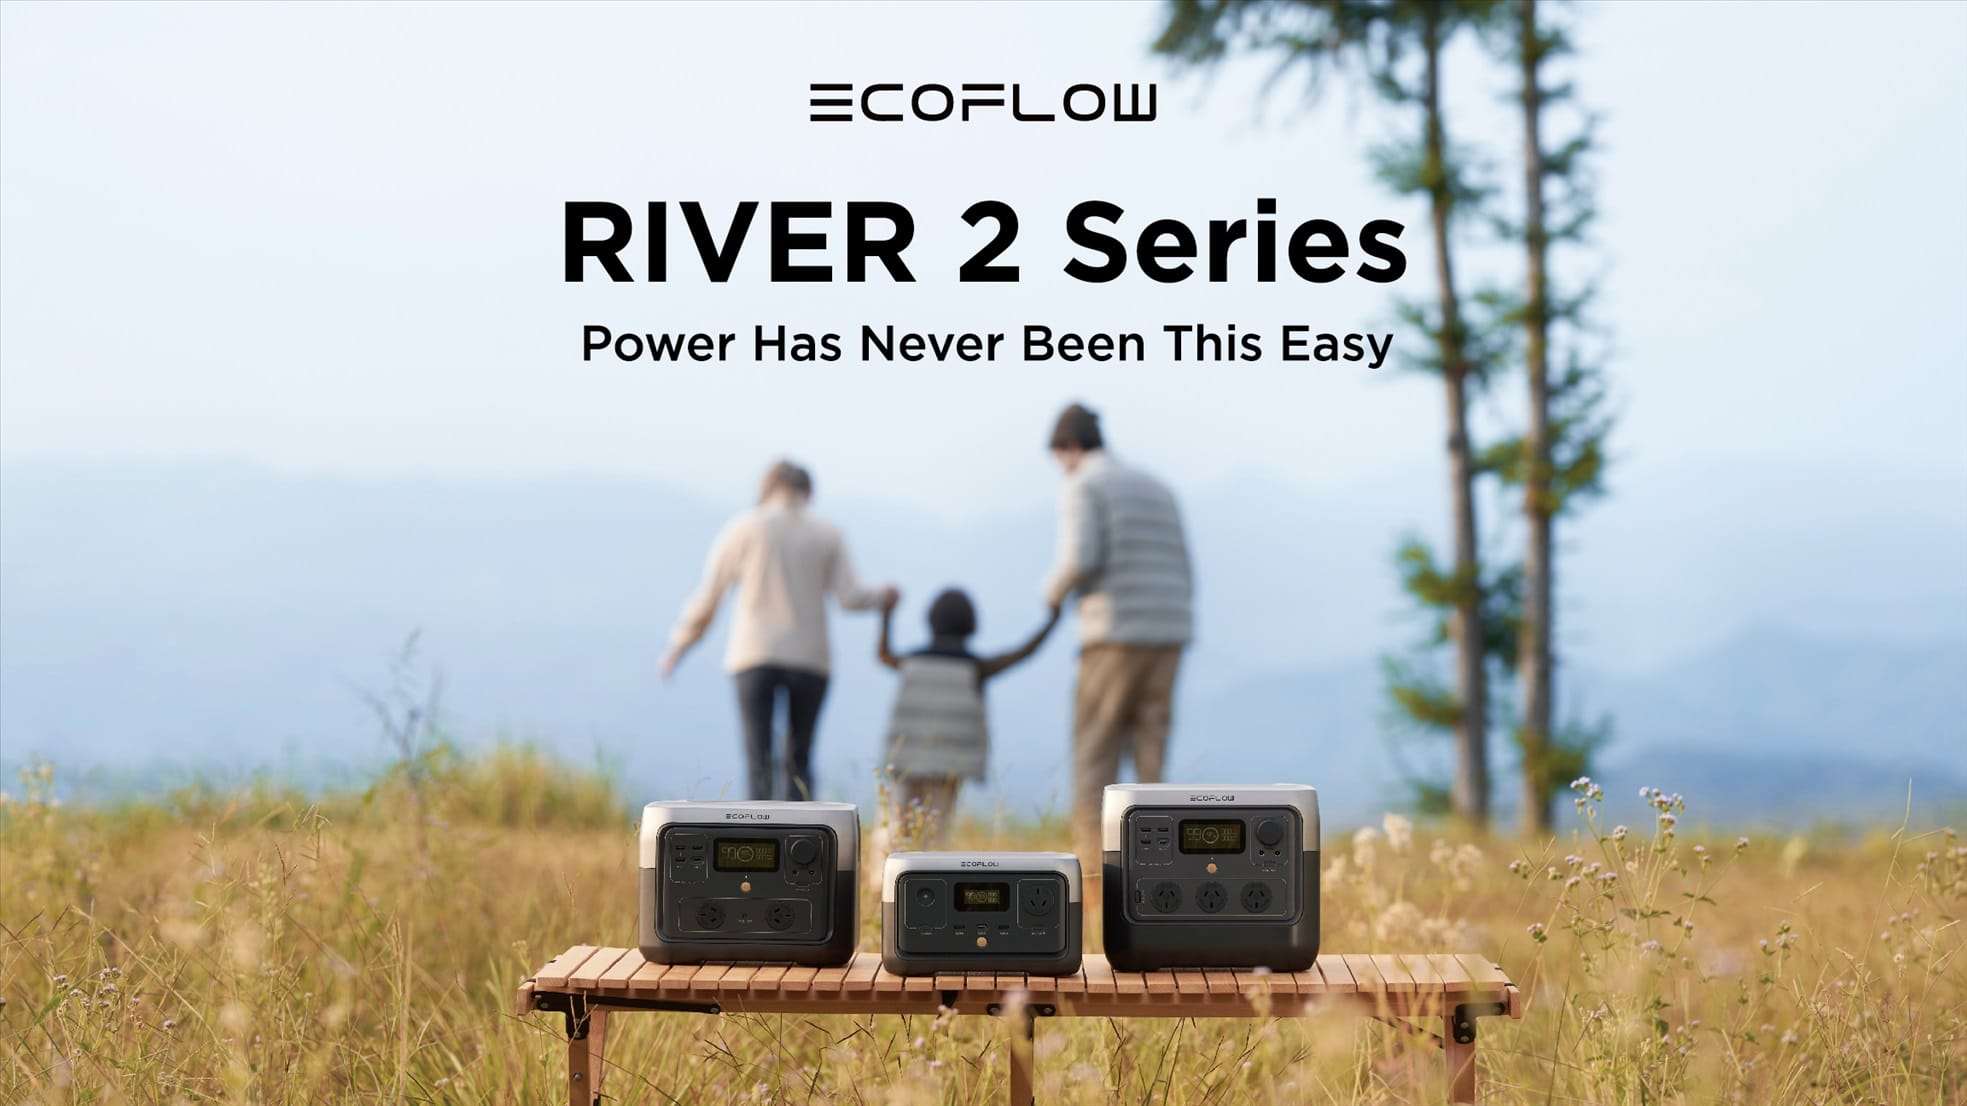 EcoFlow launches its newest and most innovative batteries in Australia